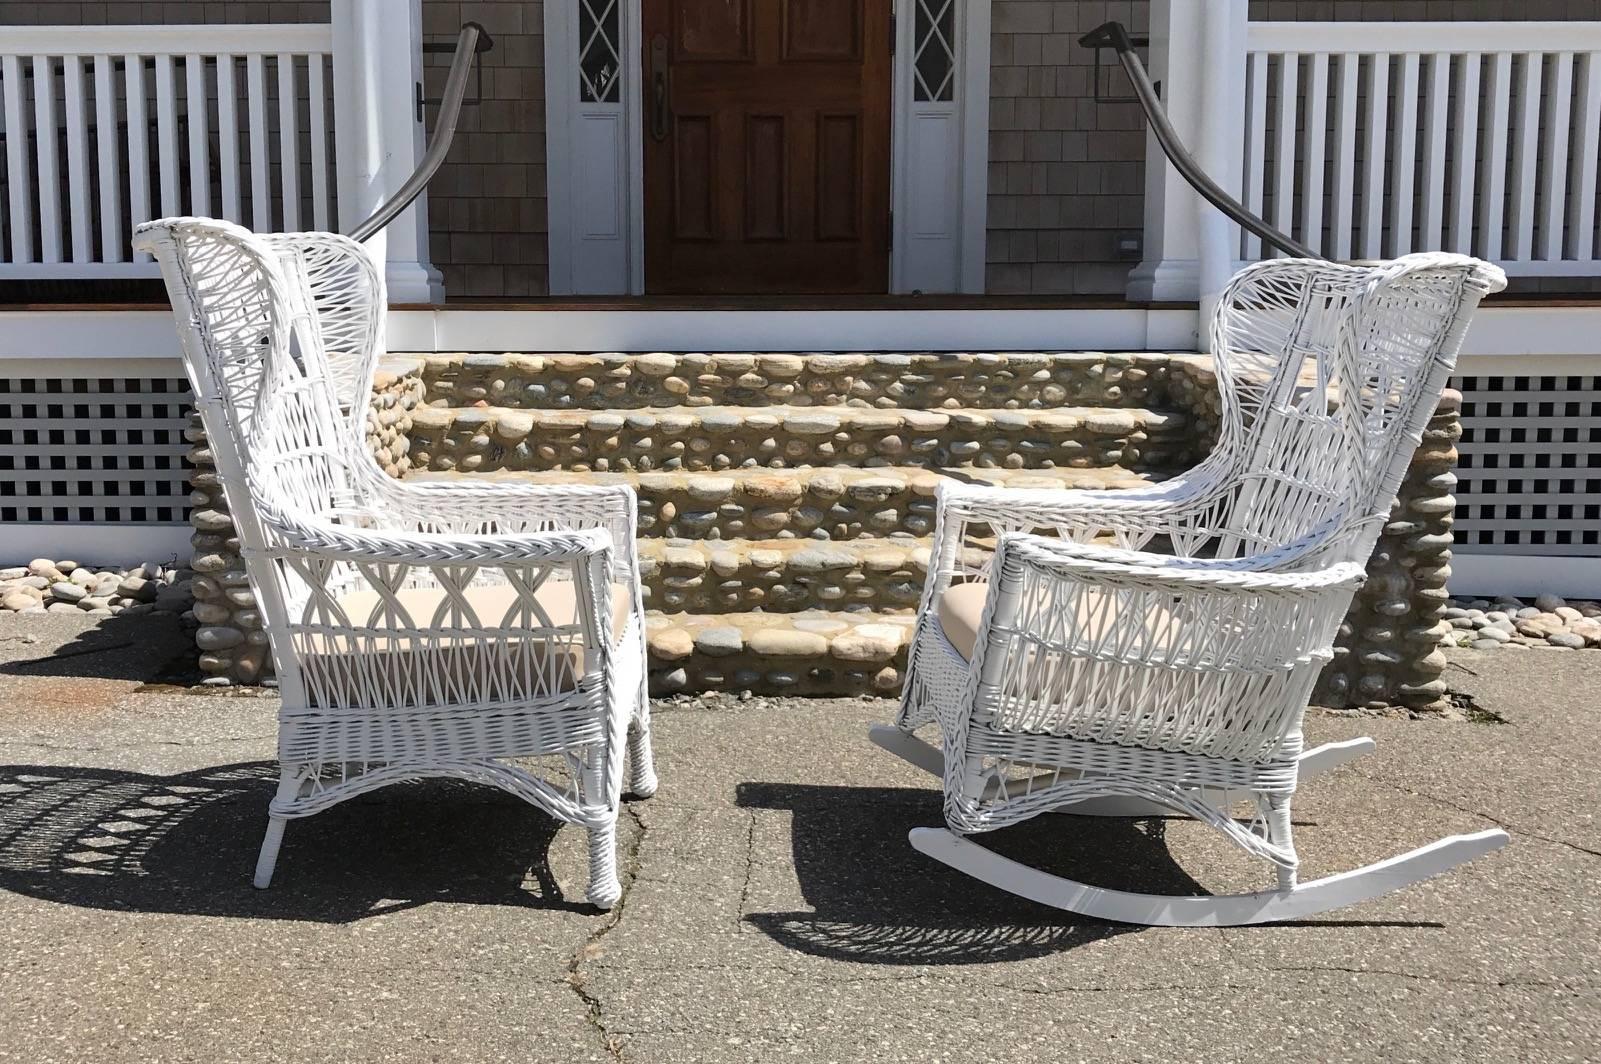 Antique wicker chair and rocker in desirable triple cross pattern woven of reed to a hardwood frame. One seat is woven and the other is a spring base.